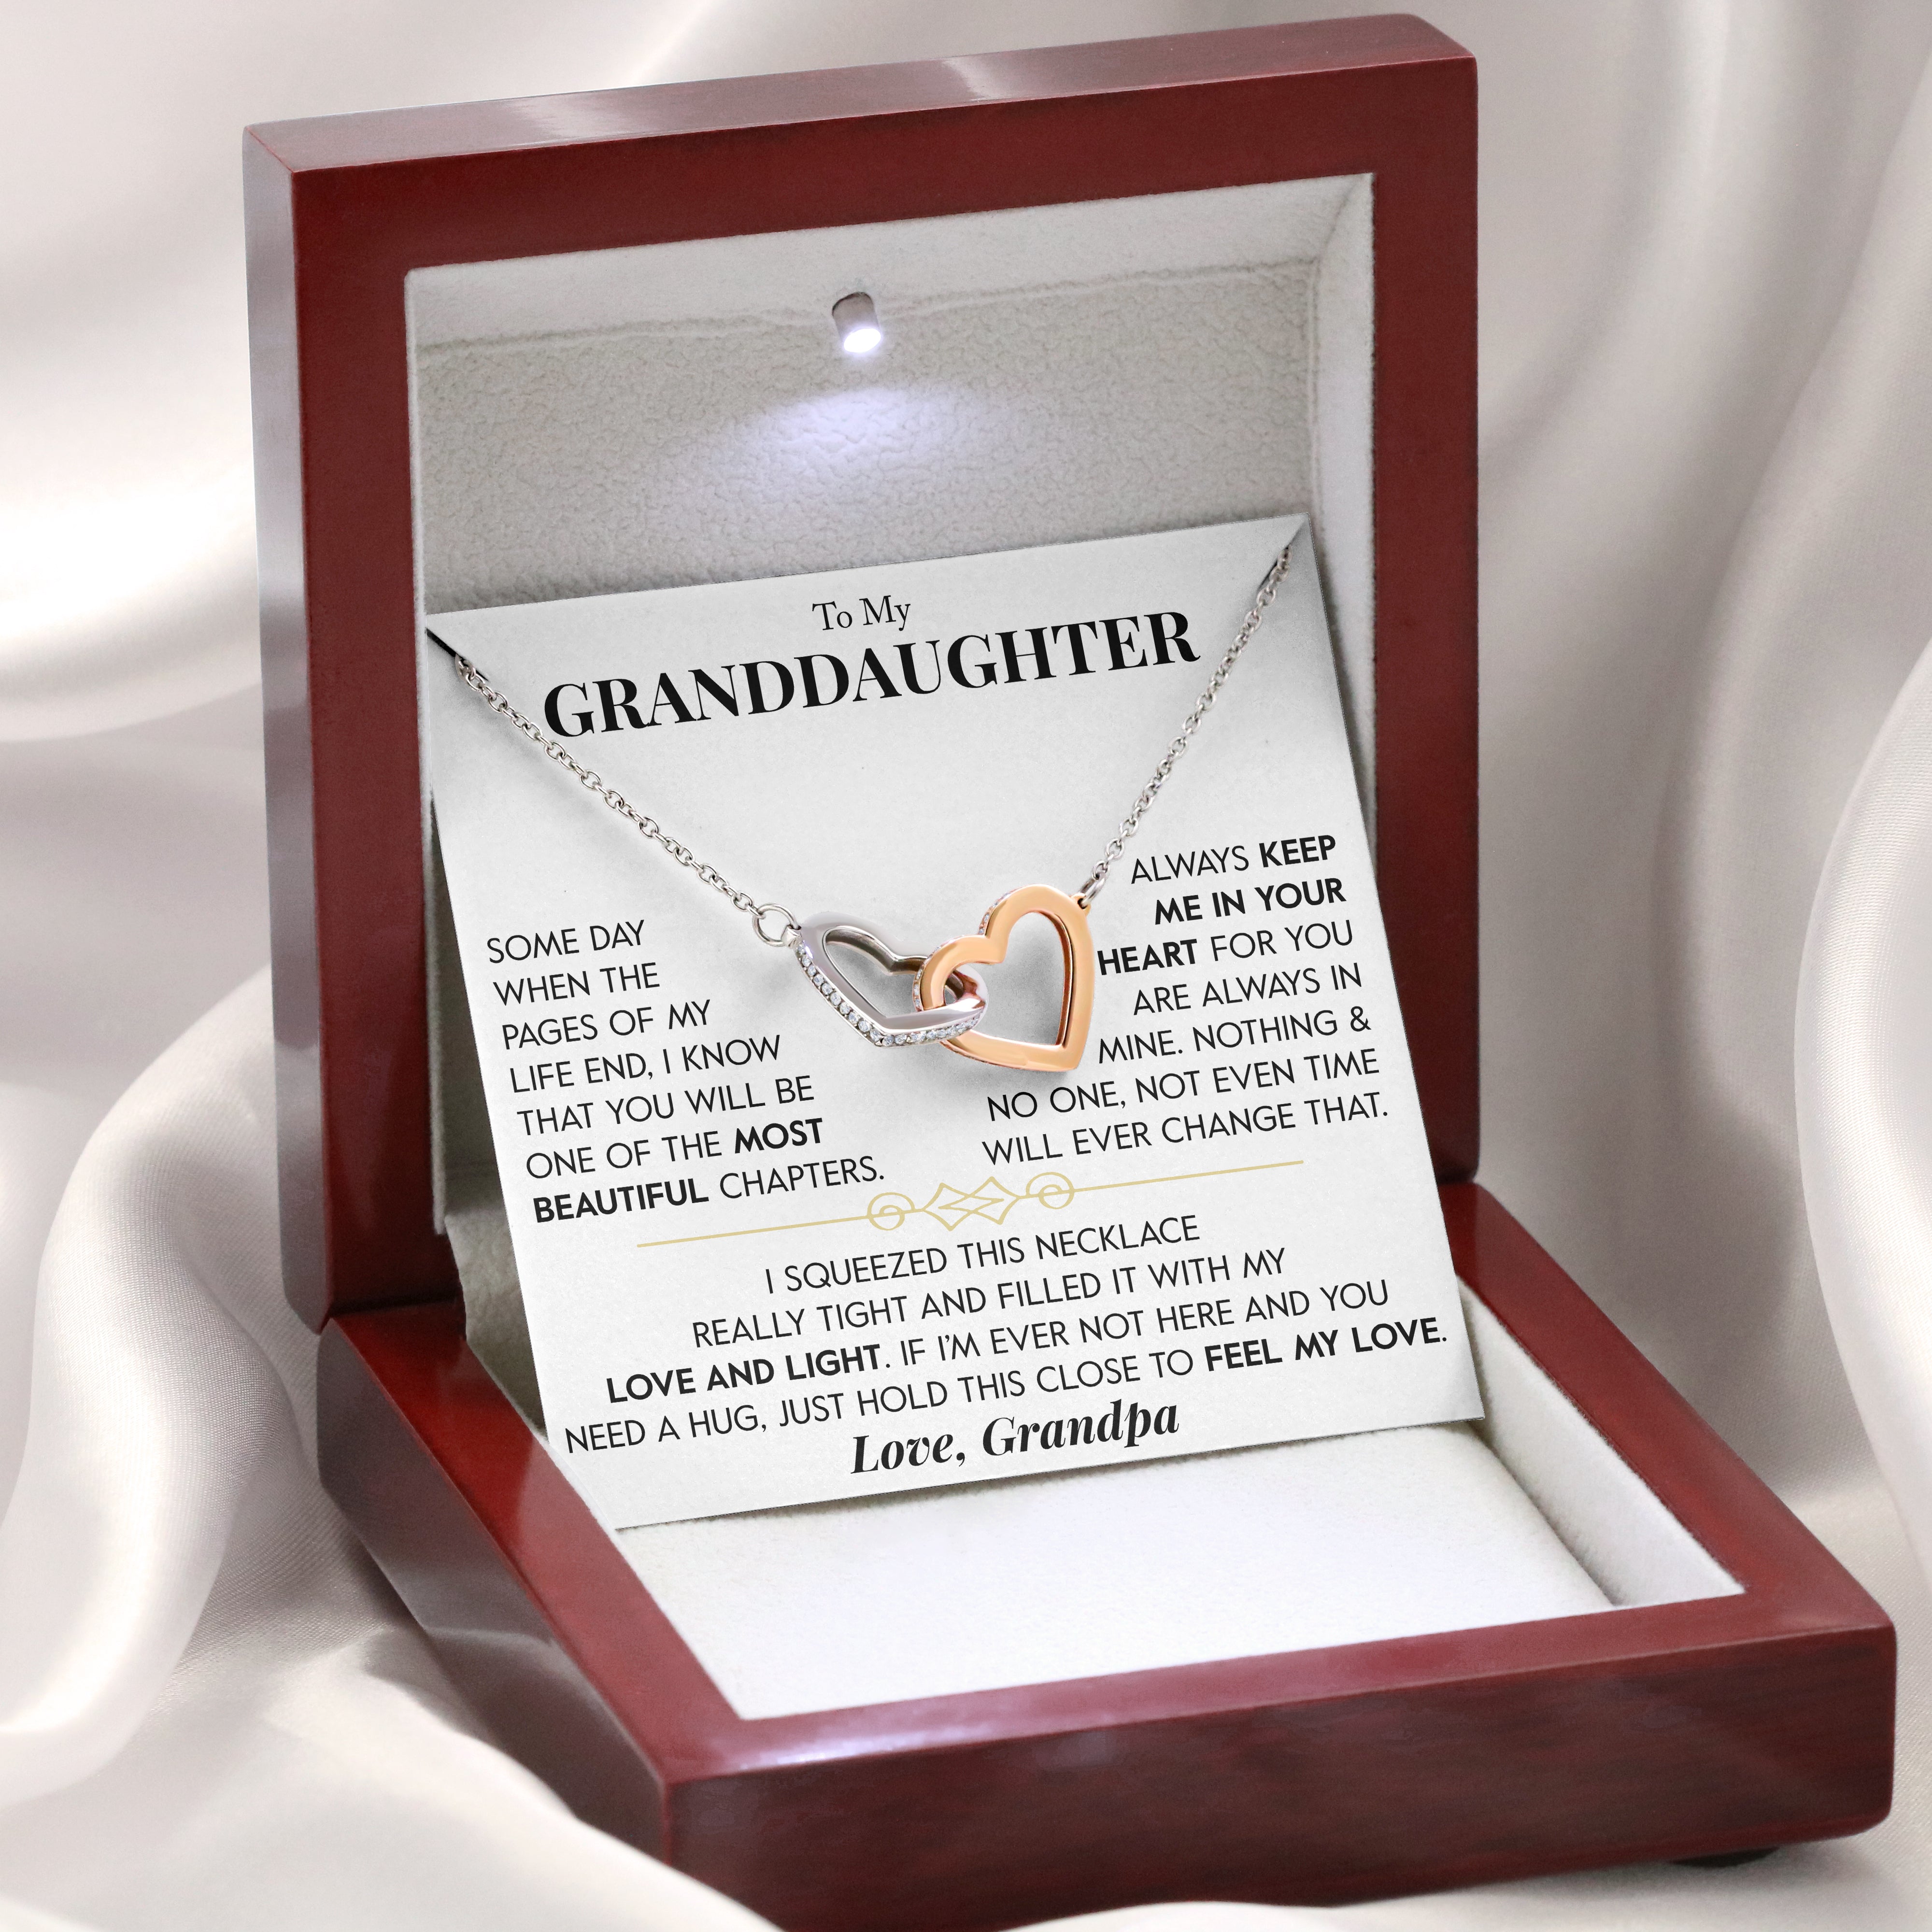 To My Granddaughter | "Keep Me In Your Heart" | Interlocking Hearts Necklace